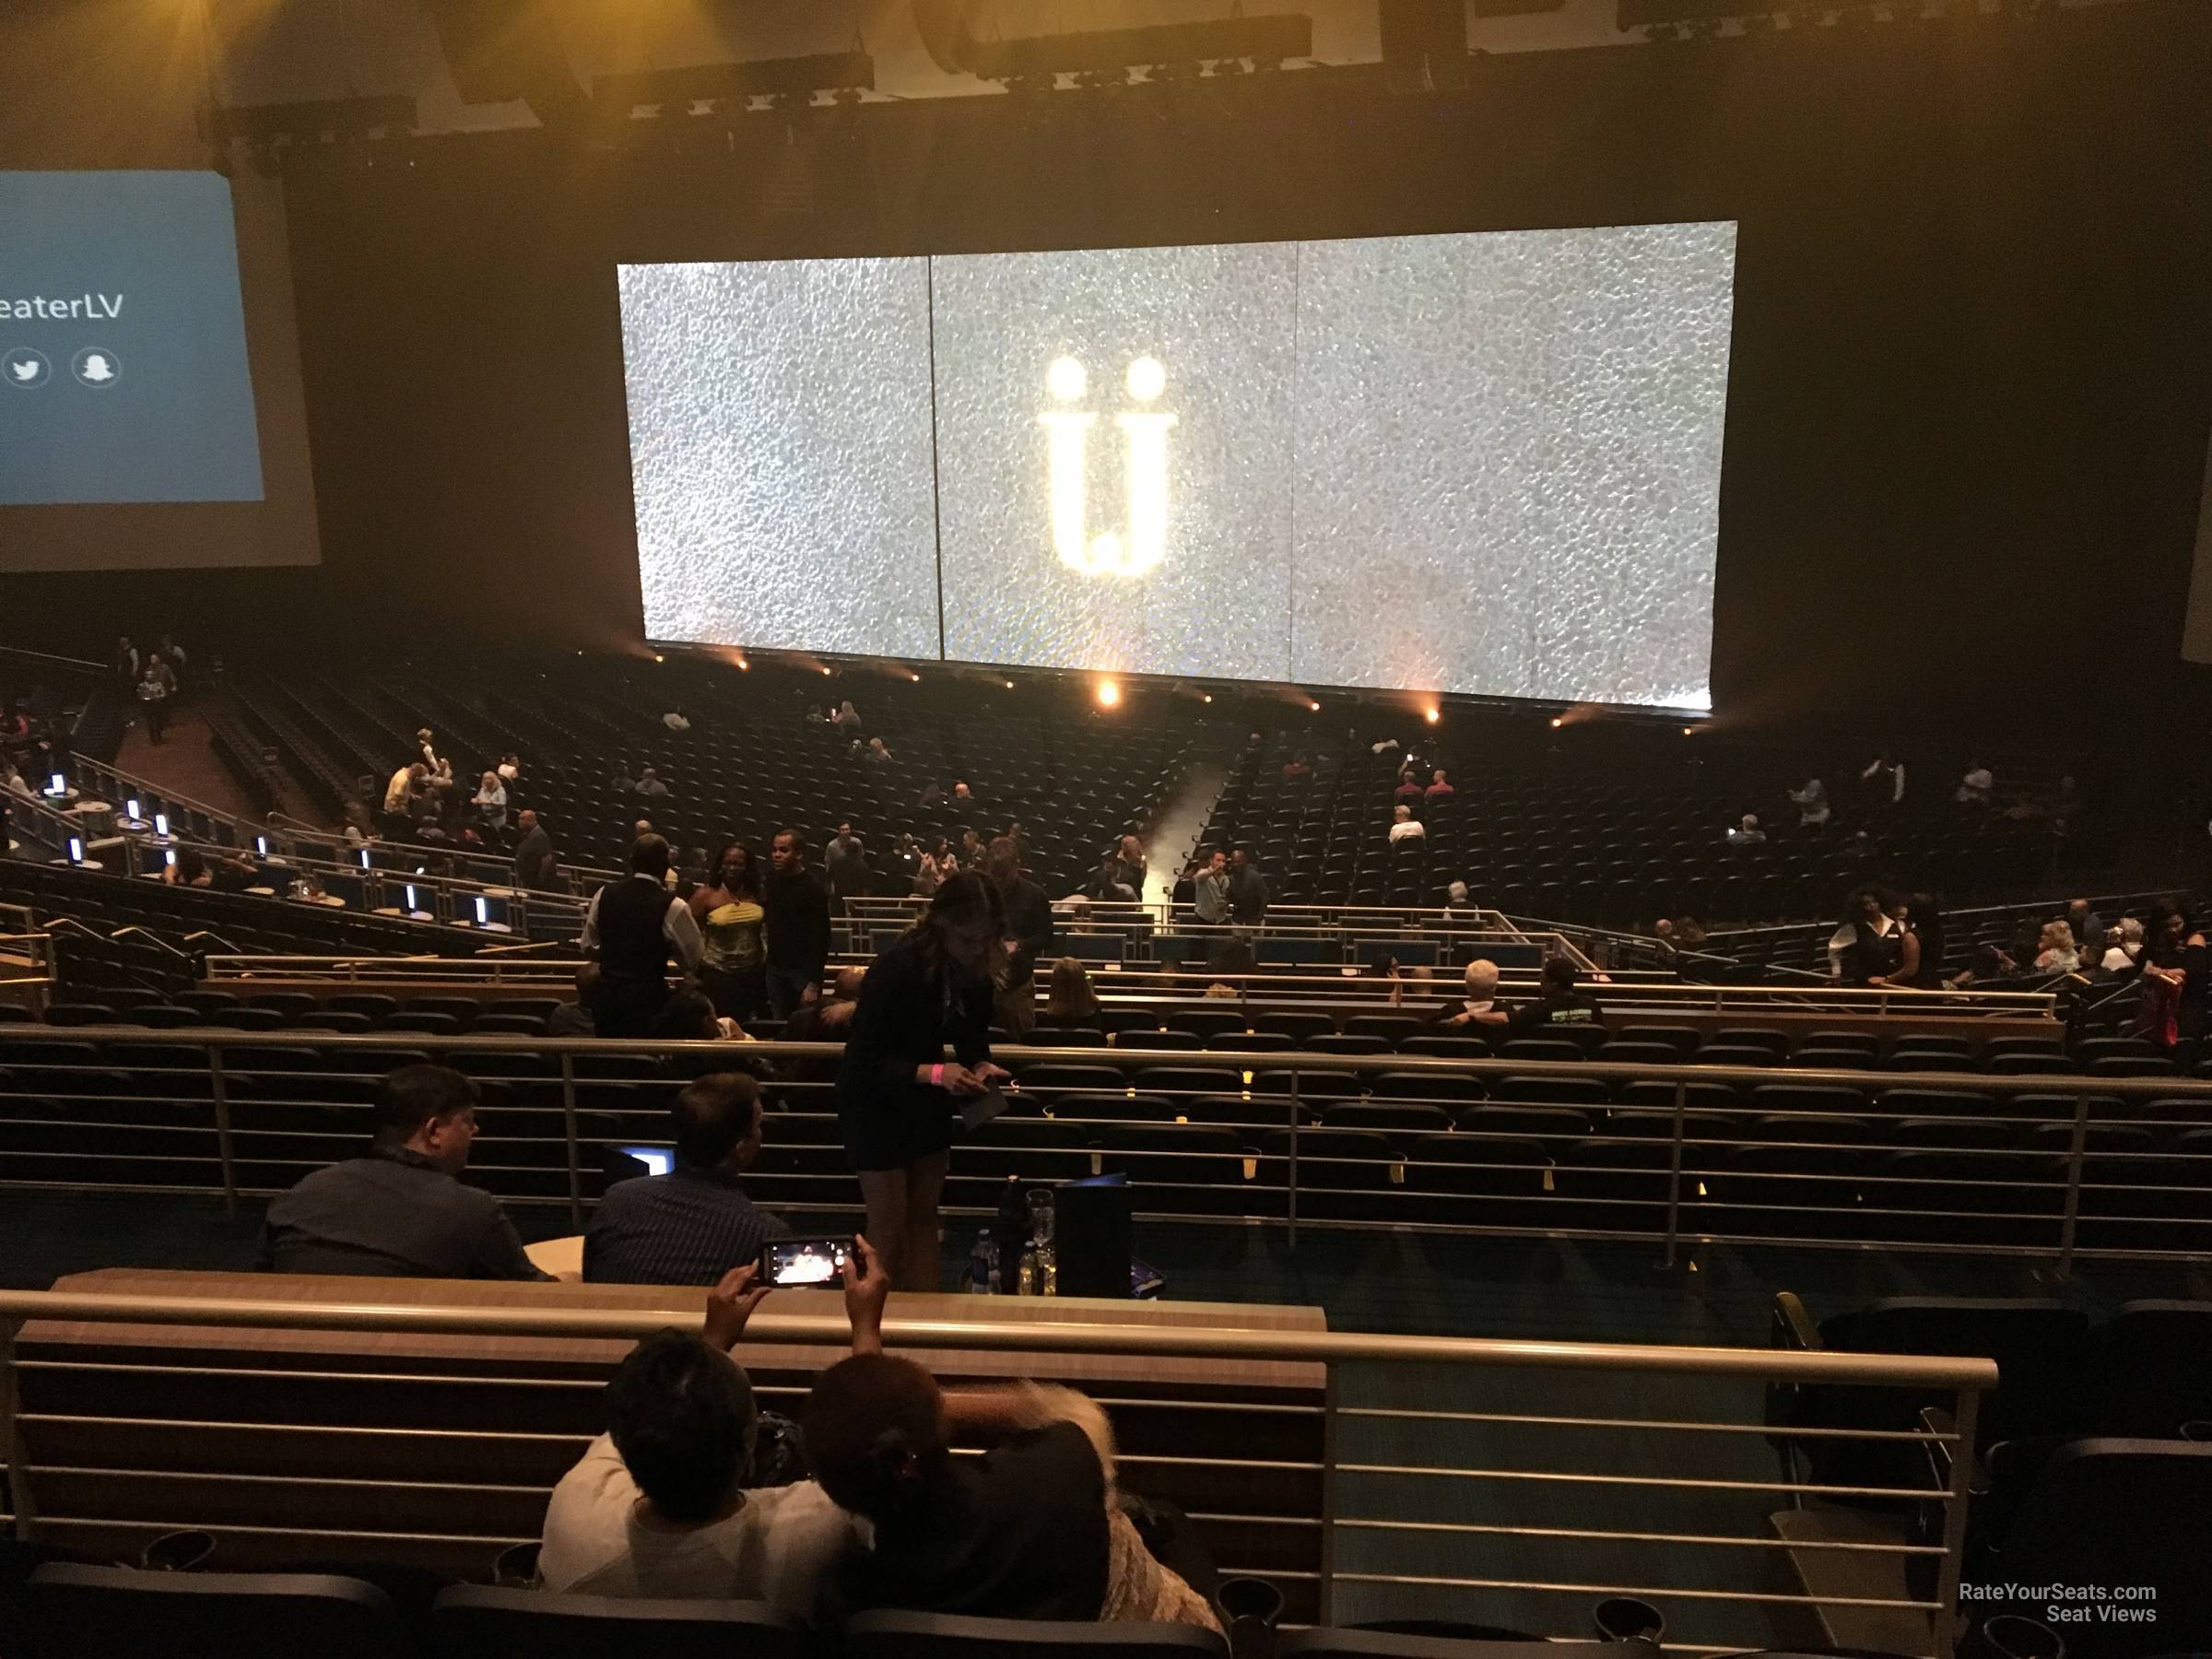 section 303, row m seat view  - dolby live at park mgm